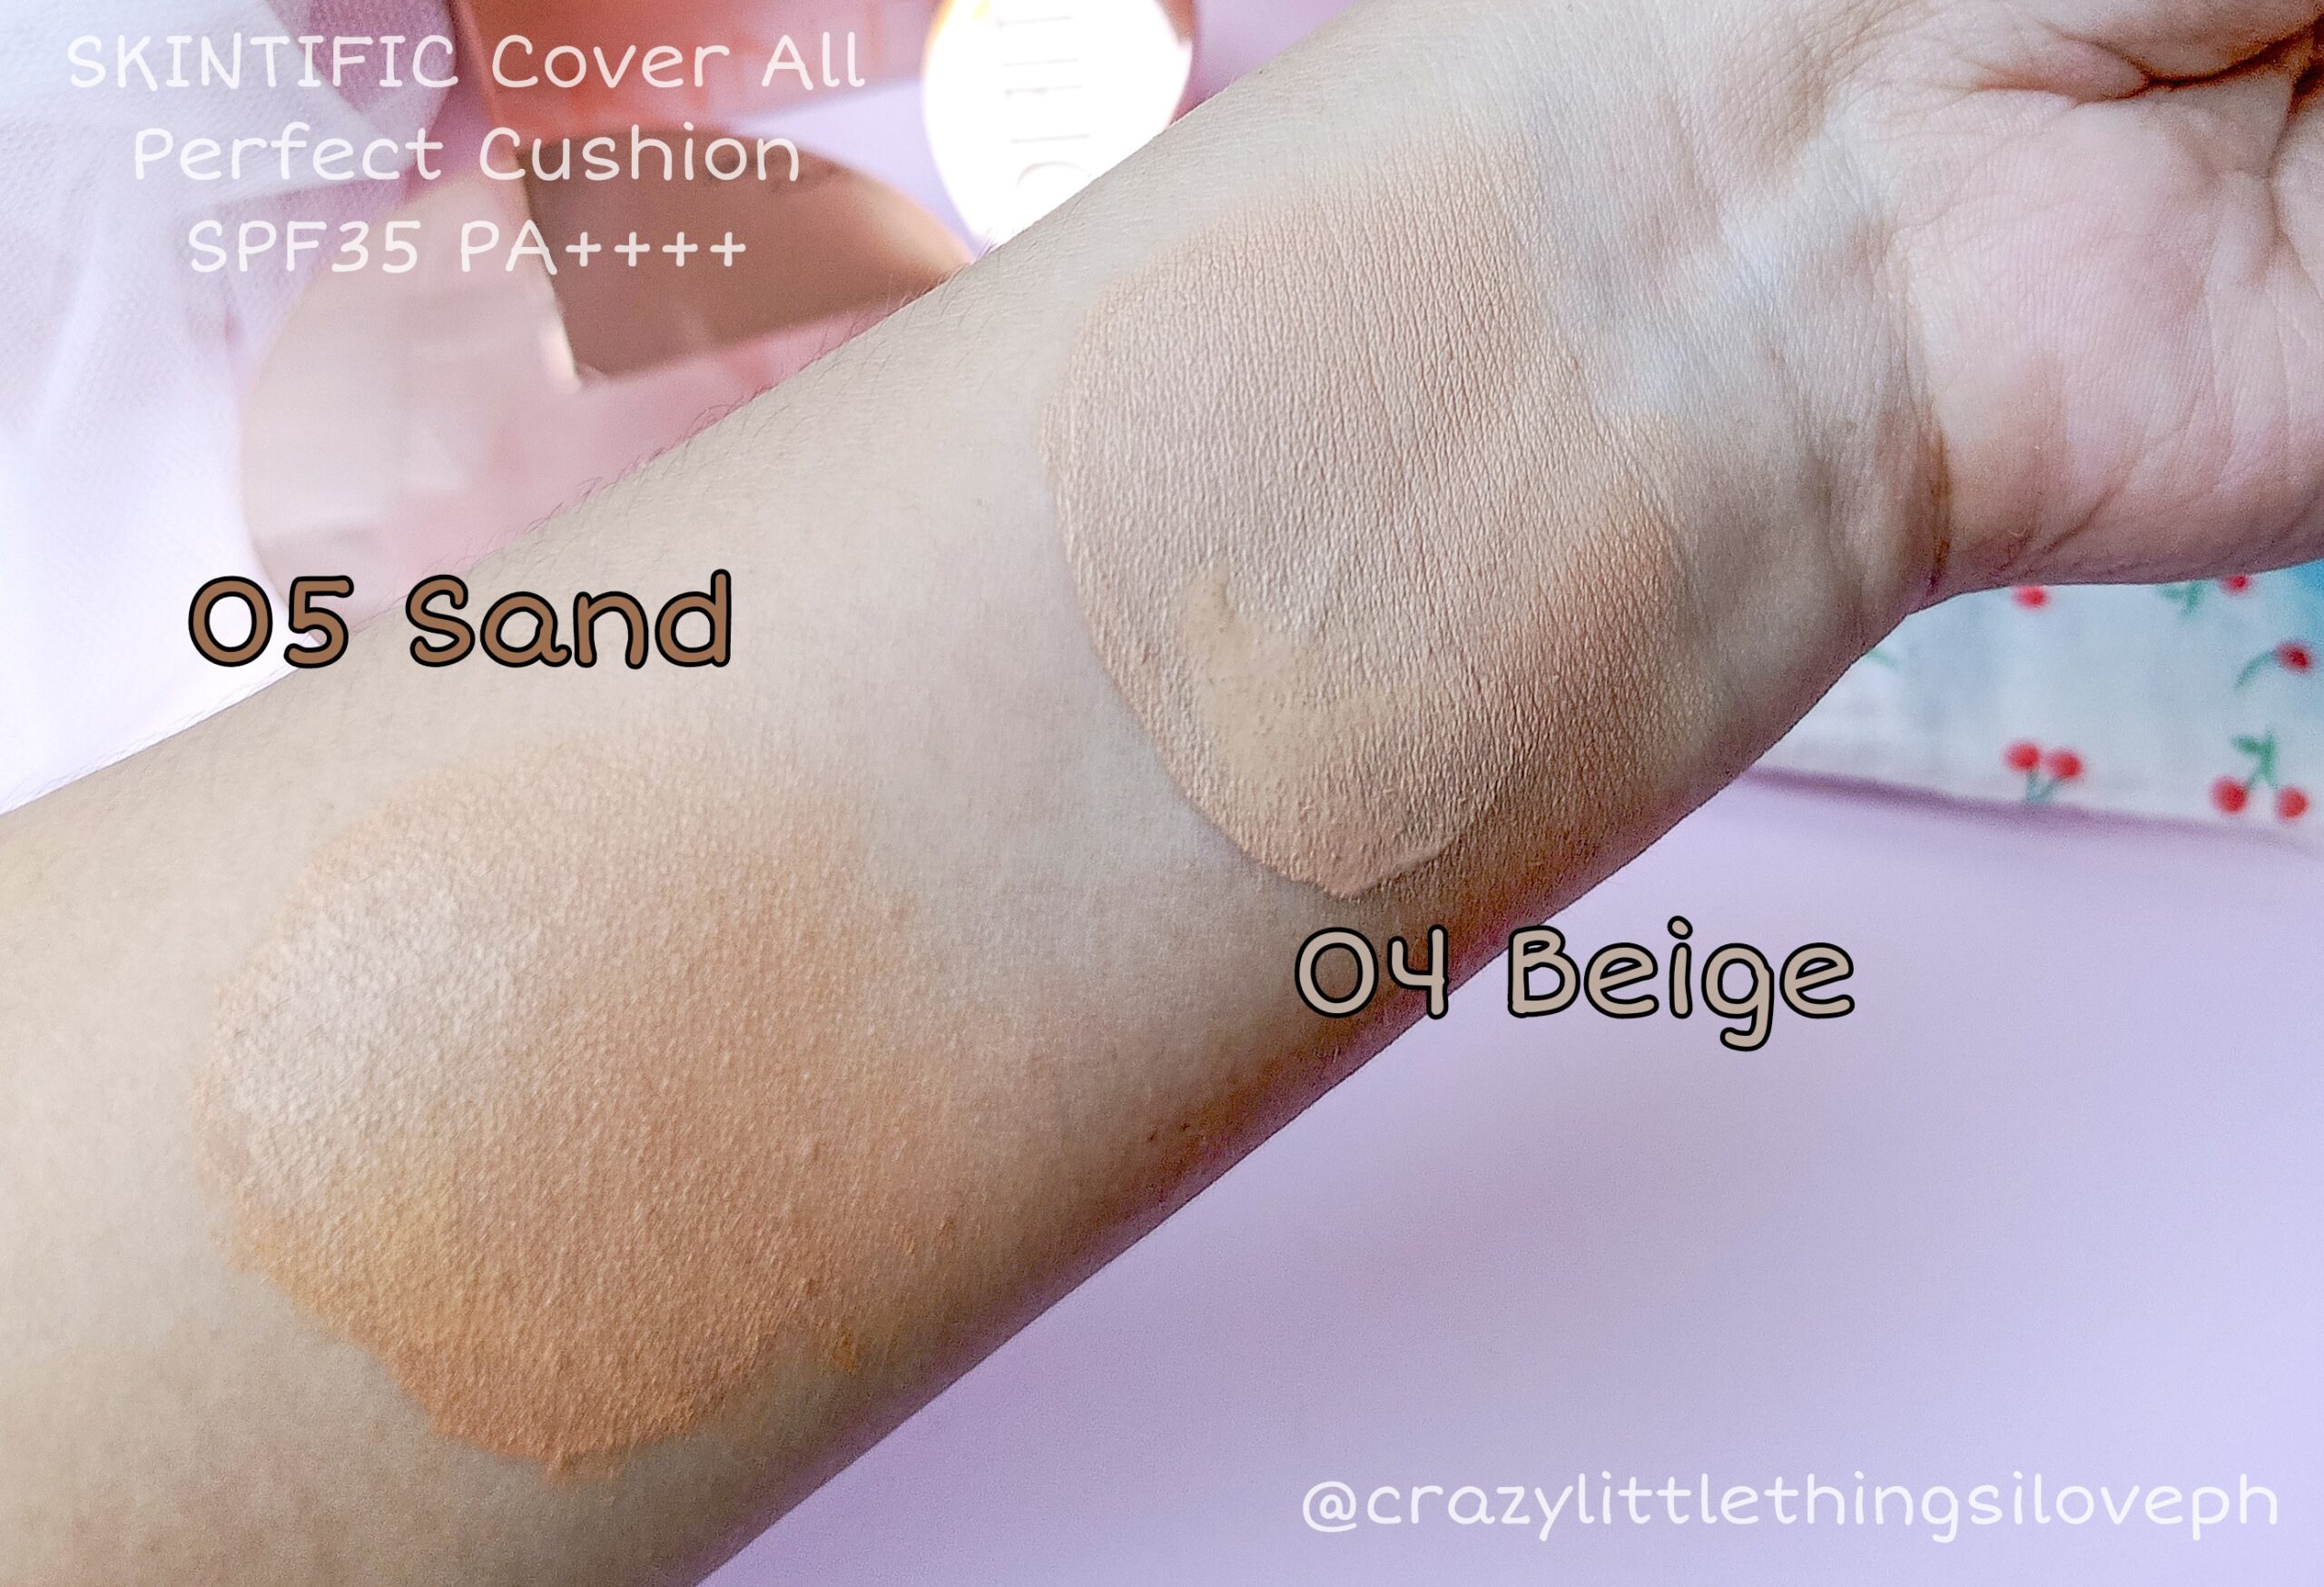 Skintific Cover All Perfect Cushion Philippines Swatches